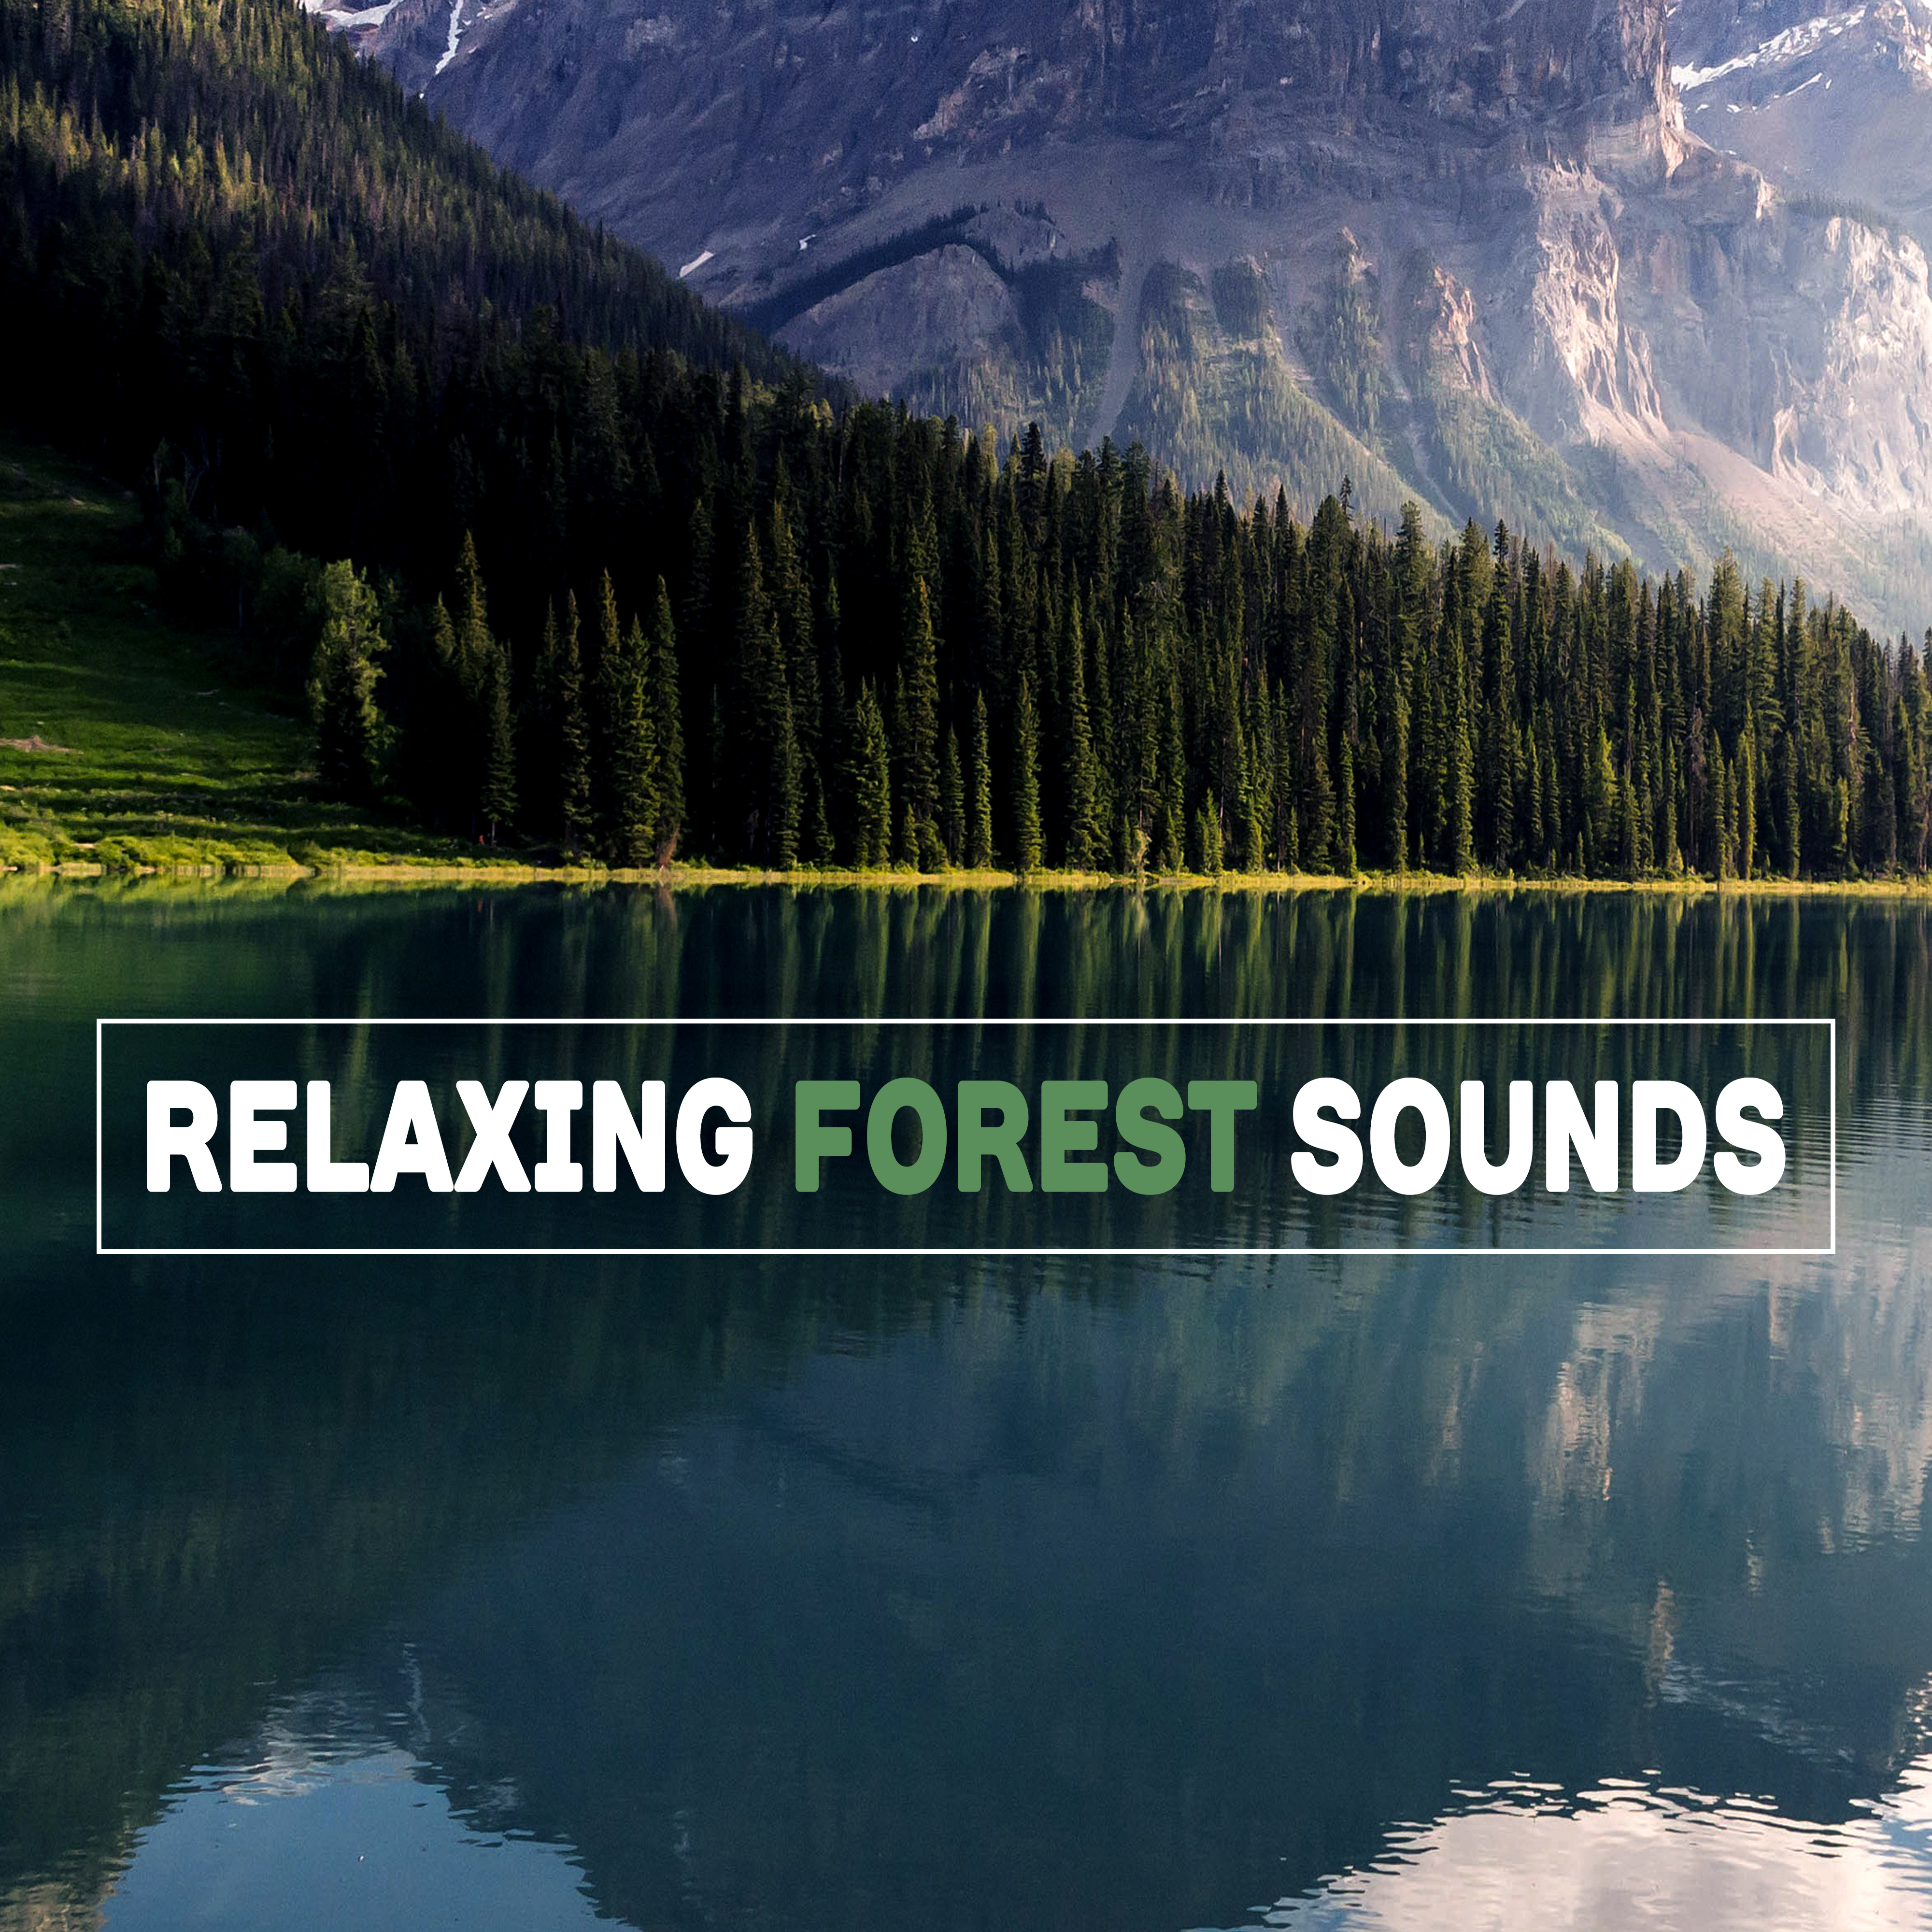 Relaxing Forest Sounds  Nature Music to Rest, Easy Listening, New Age Sounds for Spirit Calmness